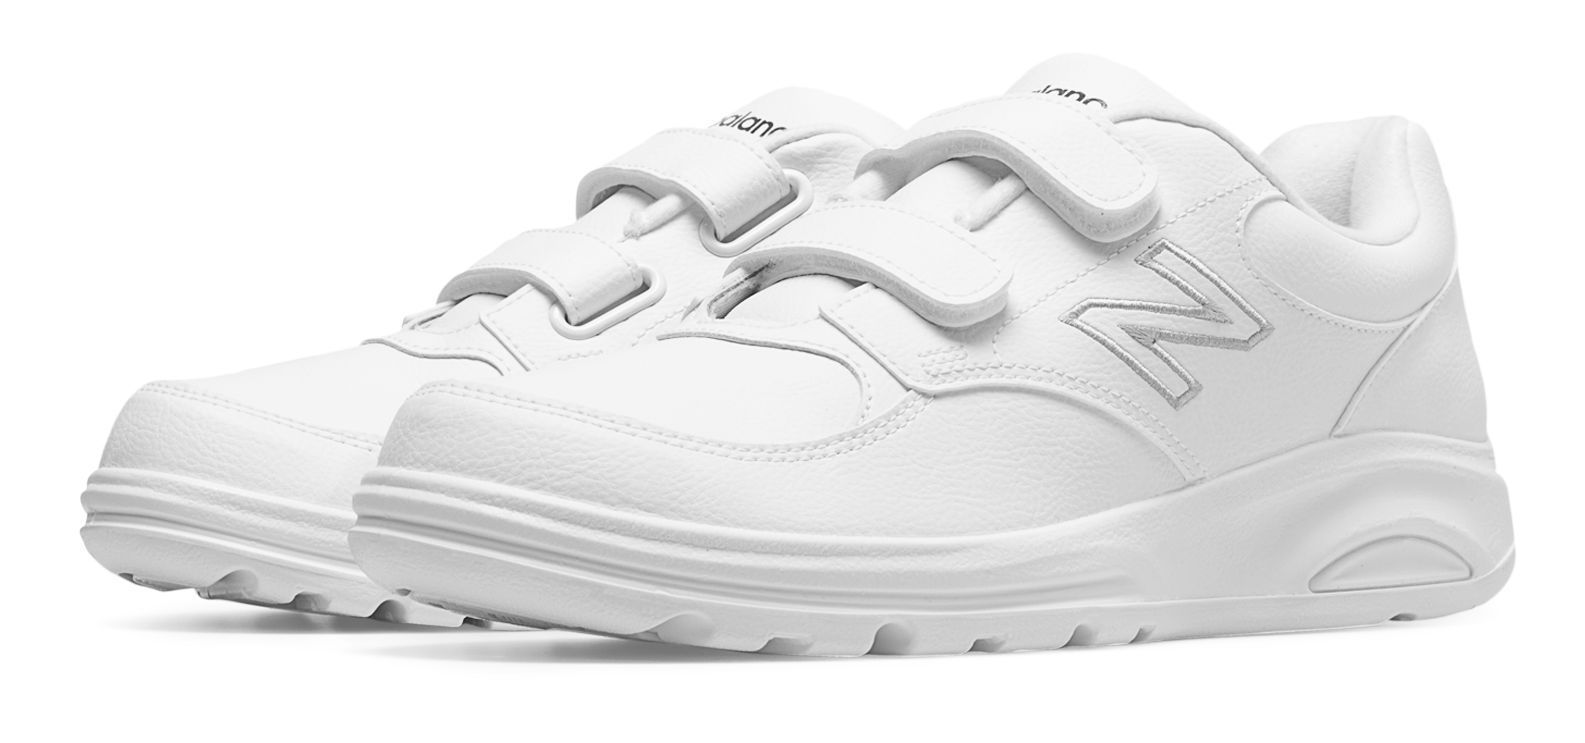 New Balance 674 men’s walking shoes for $25